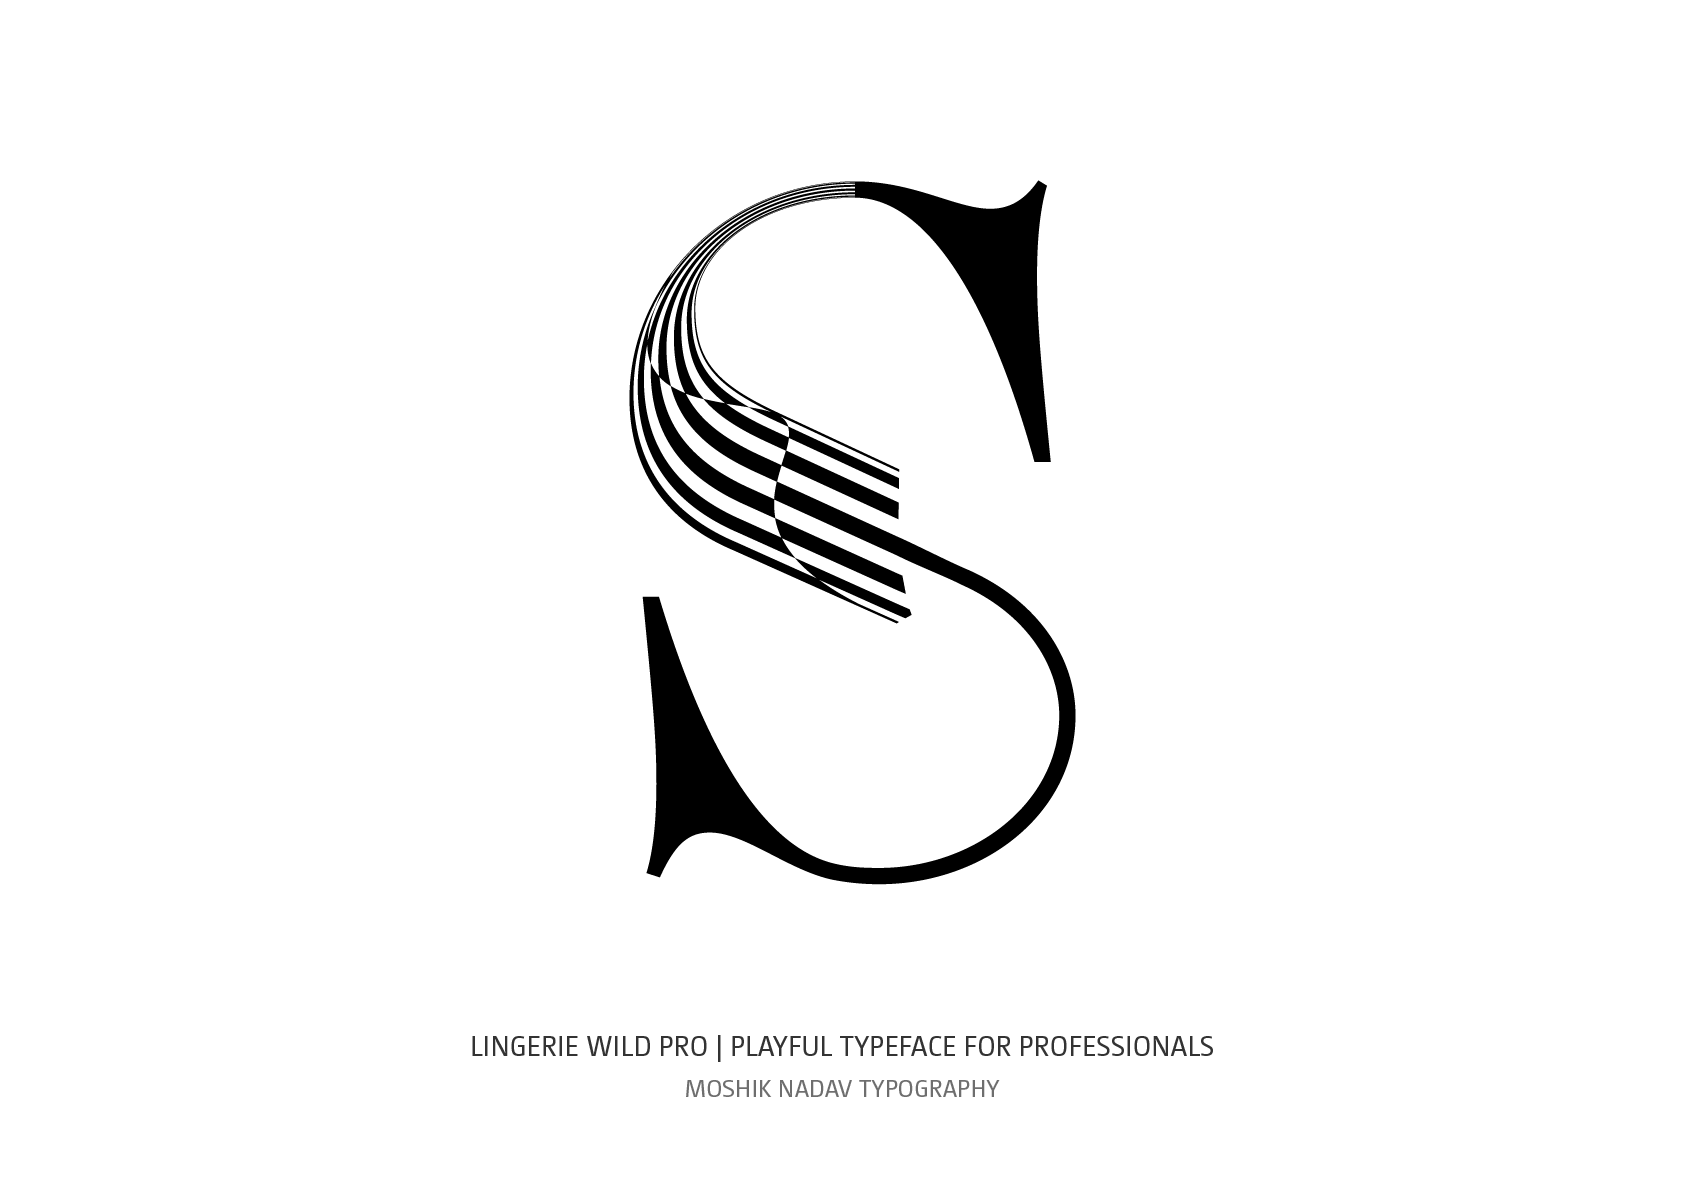 Super sexy uppercase S designed for fashion logos and luxury brands by Moshik Nadav Typography